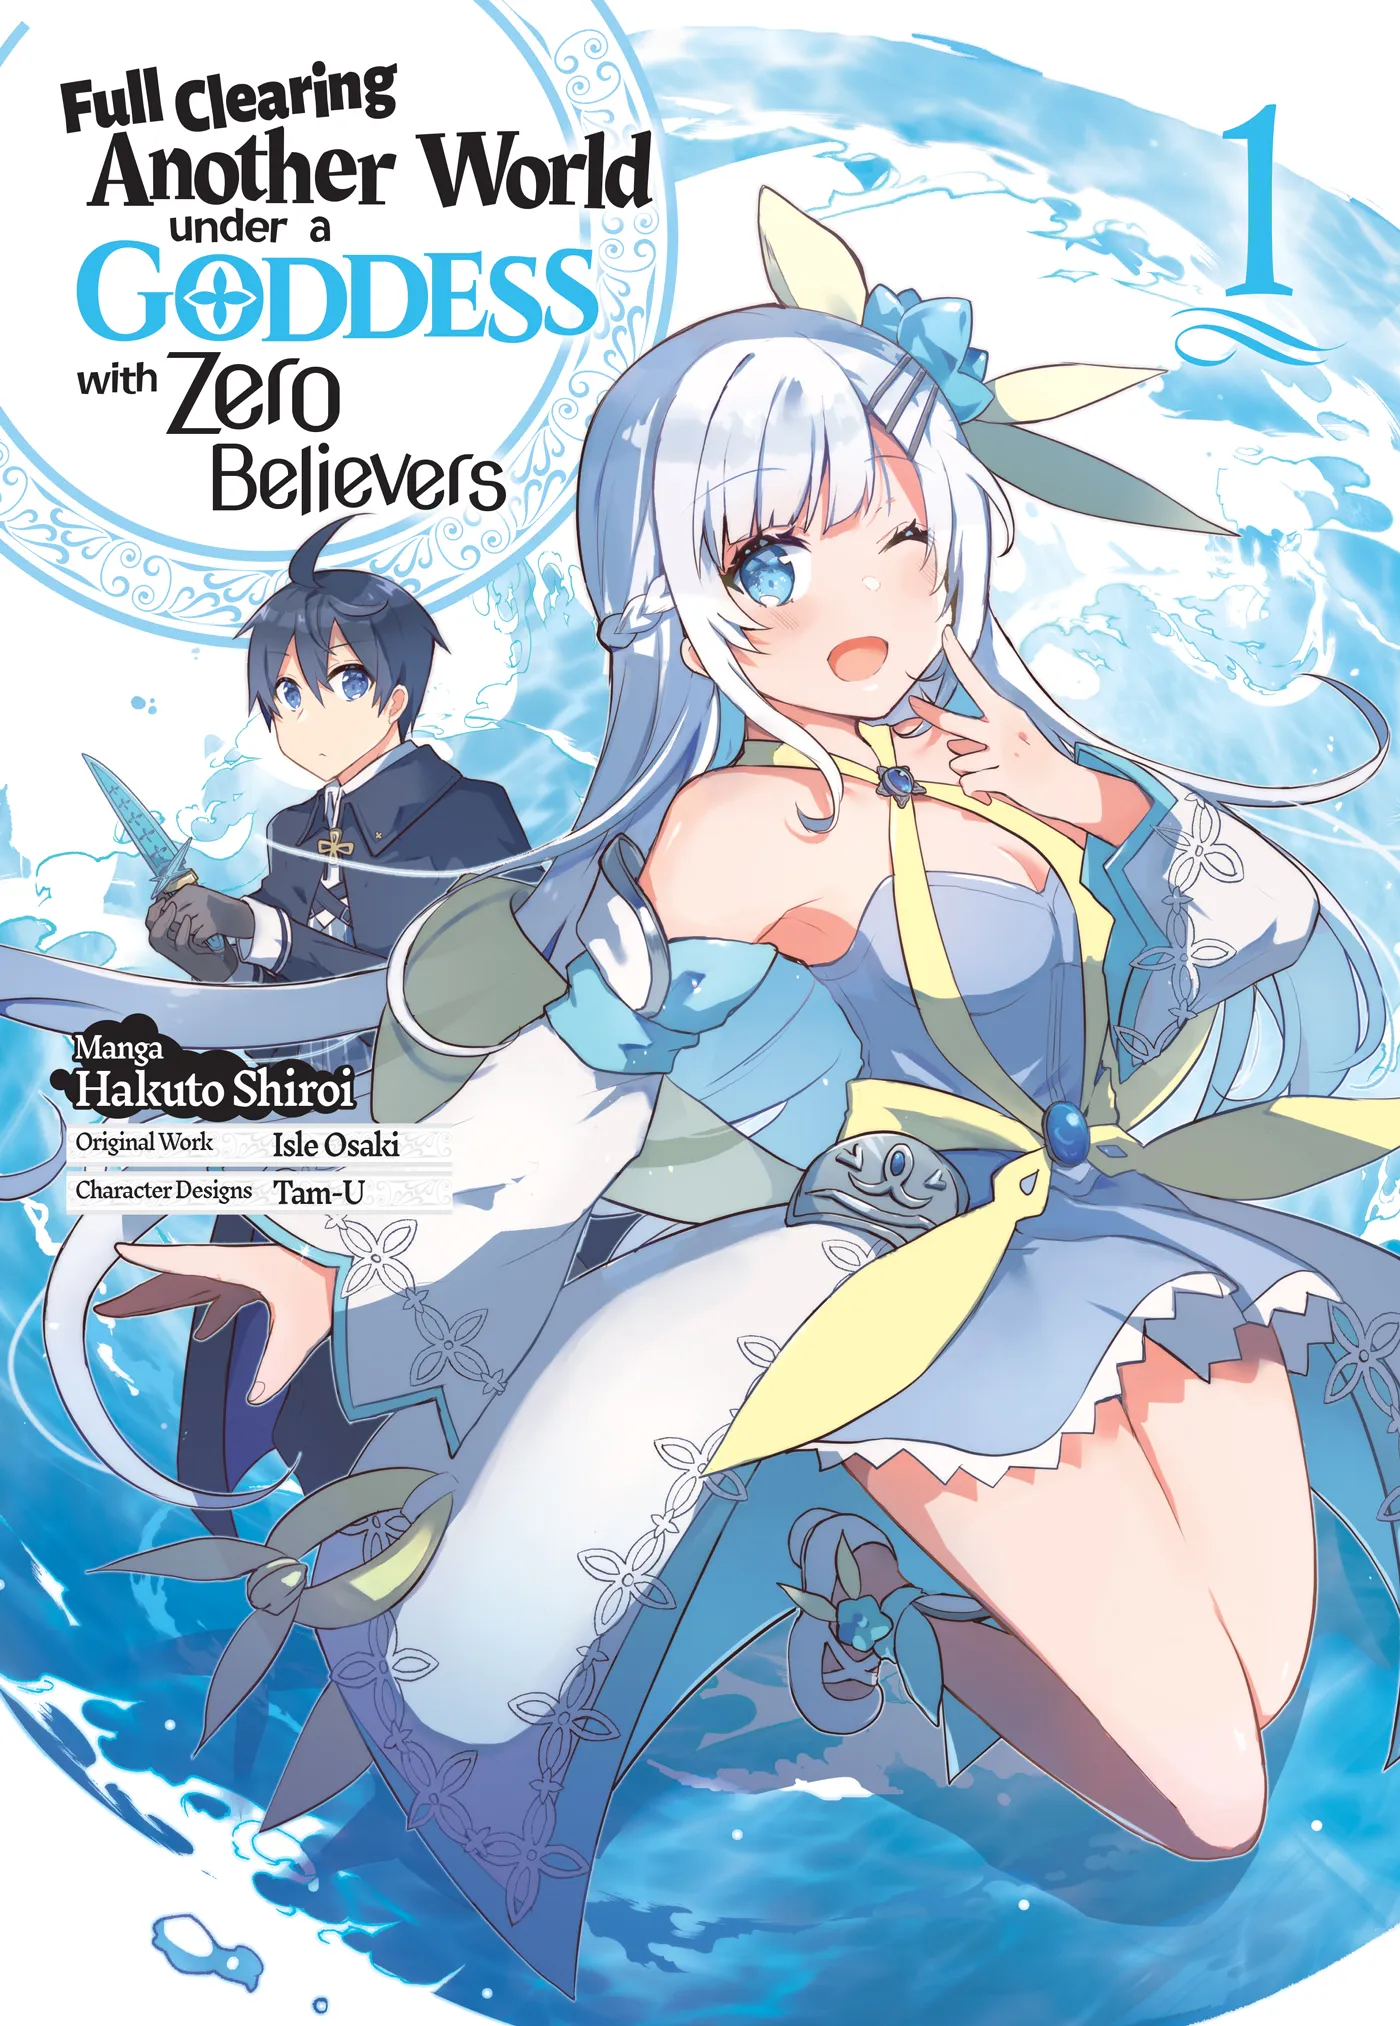 Full Clearing Another World under a Goddess with Zero Believers (manga)- J Novel Club